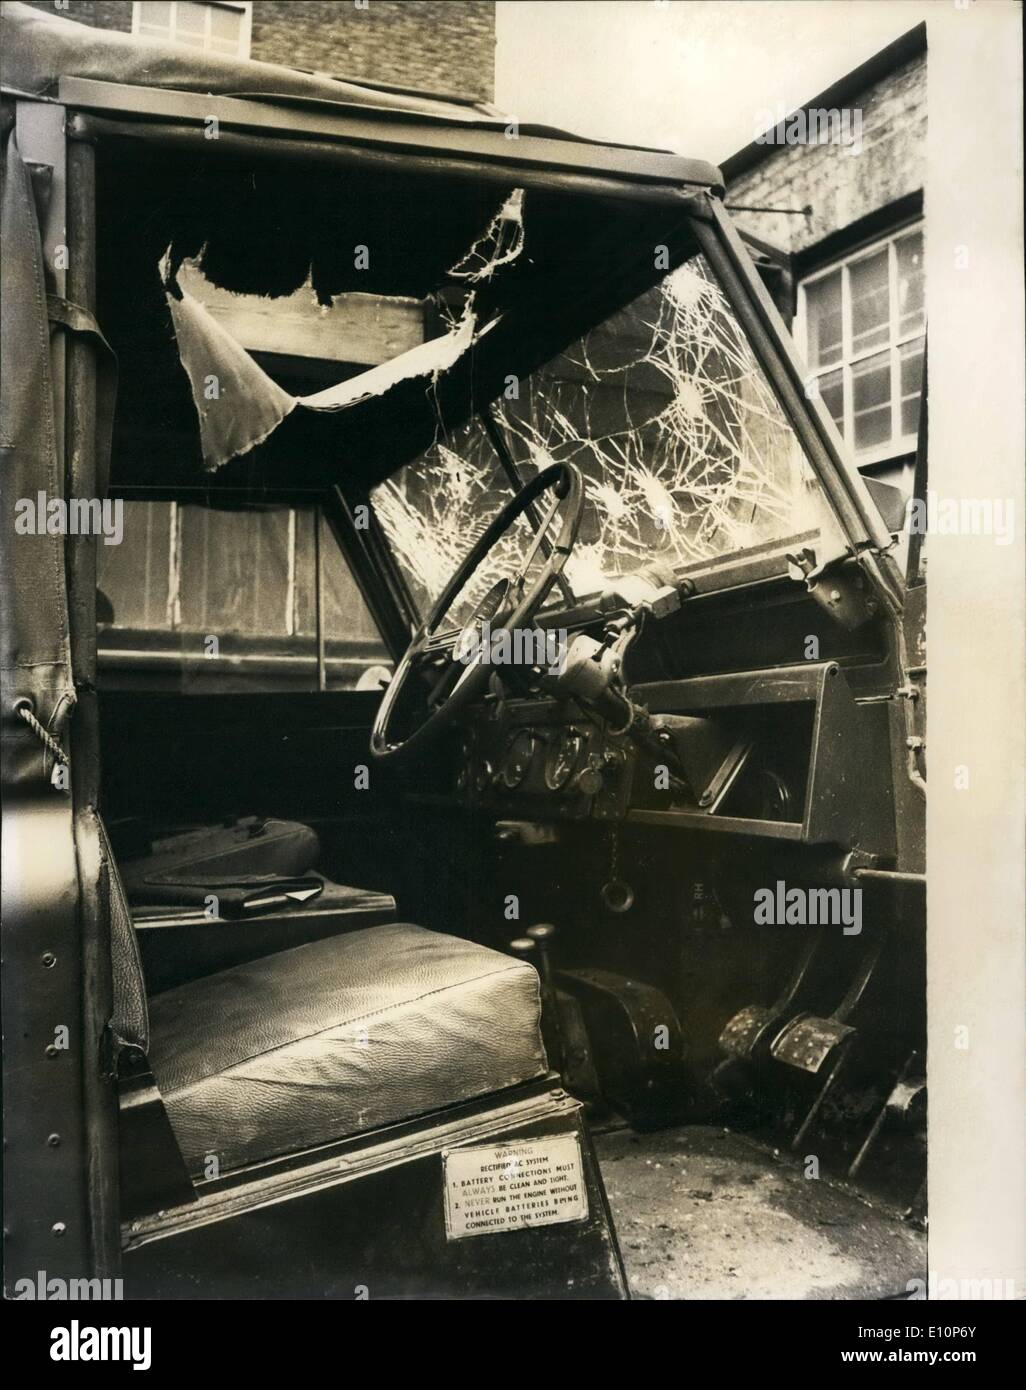 Sep. 09, 1973 - Bomb Explosion At Barracks In Chelsea. Five people were injured and several Army vehicles damaged, when a bomb exploded in a garage at the Duke of York Barracks, in Kings Road, Chelsea. Keystone Photo Shows:- One of the damaged Army vehicles, after the explosion. Stock Photo